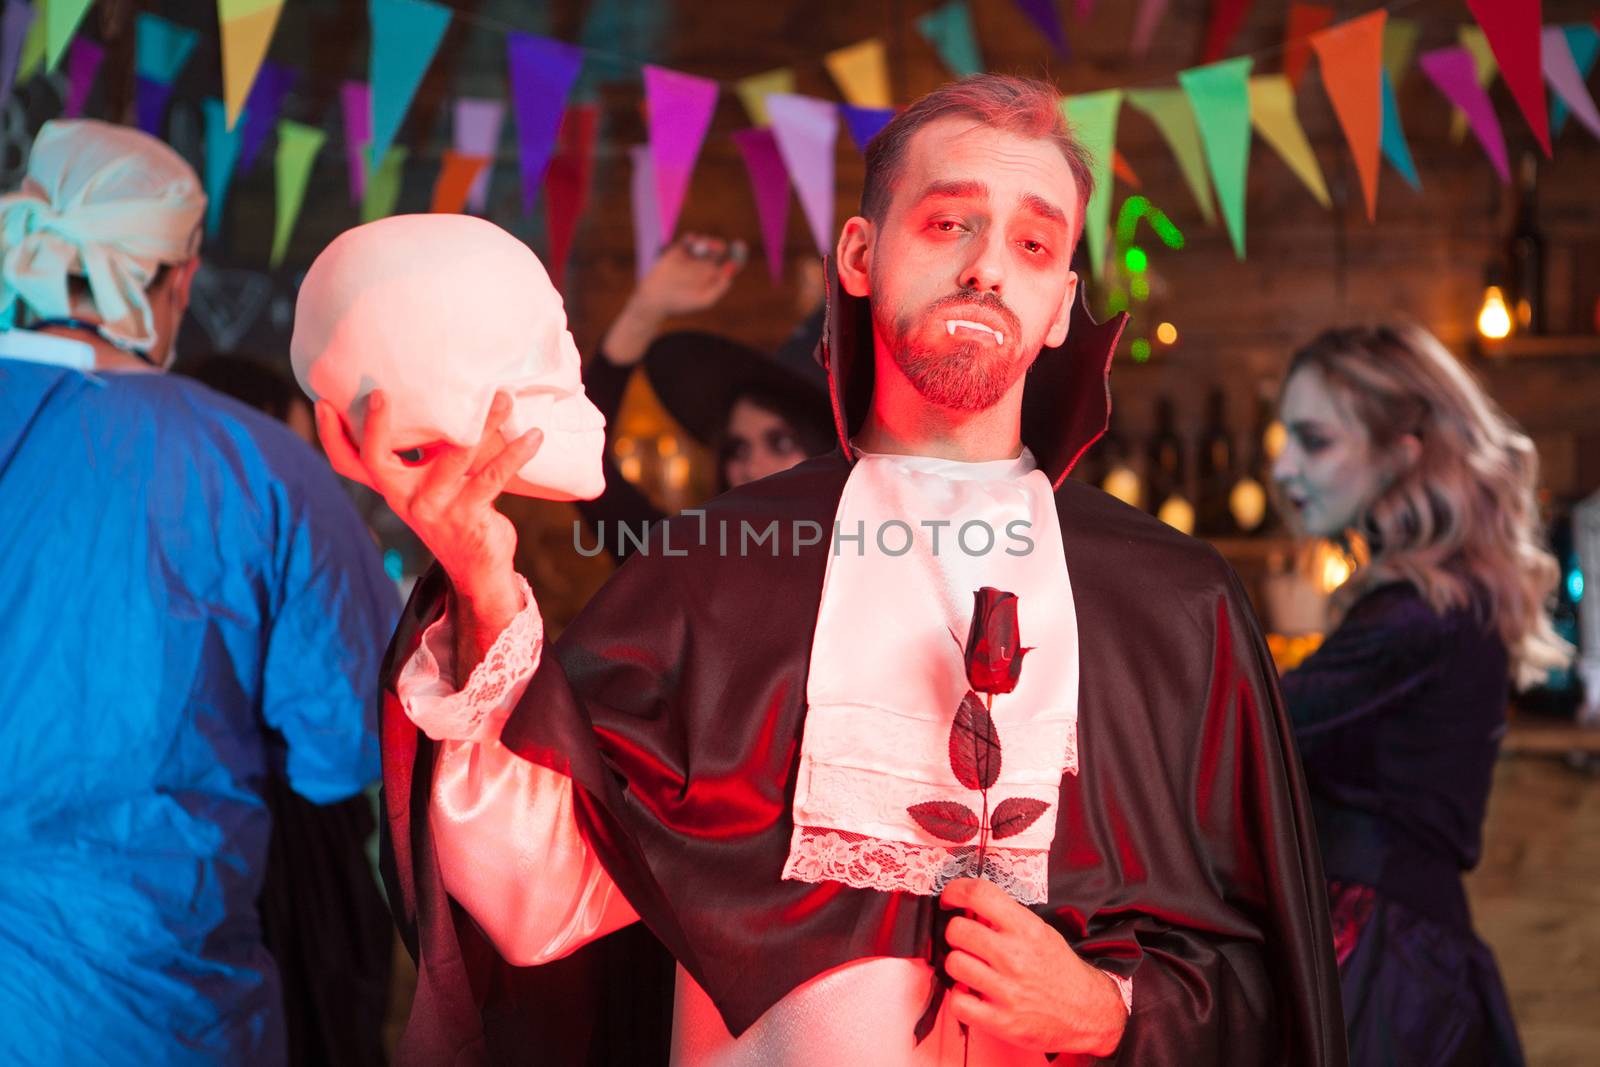 Attractive man dressed up like vampire with a human skull at halloween party. Creepy vampire at halloween celebration.